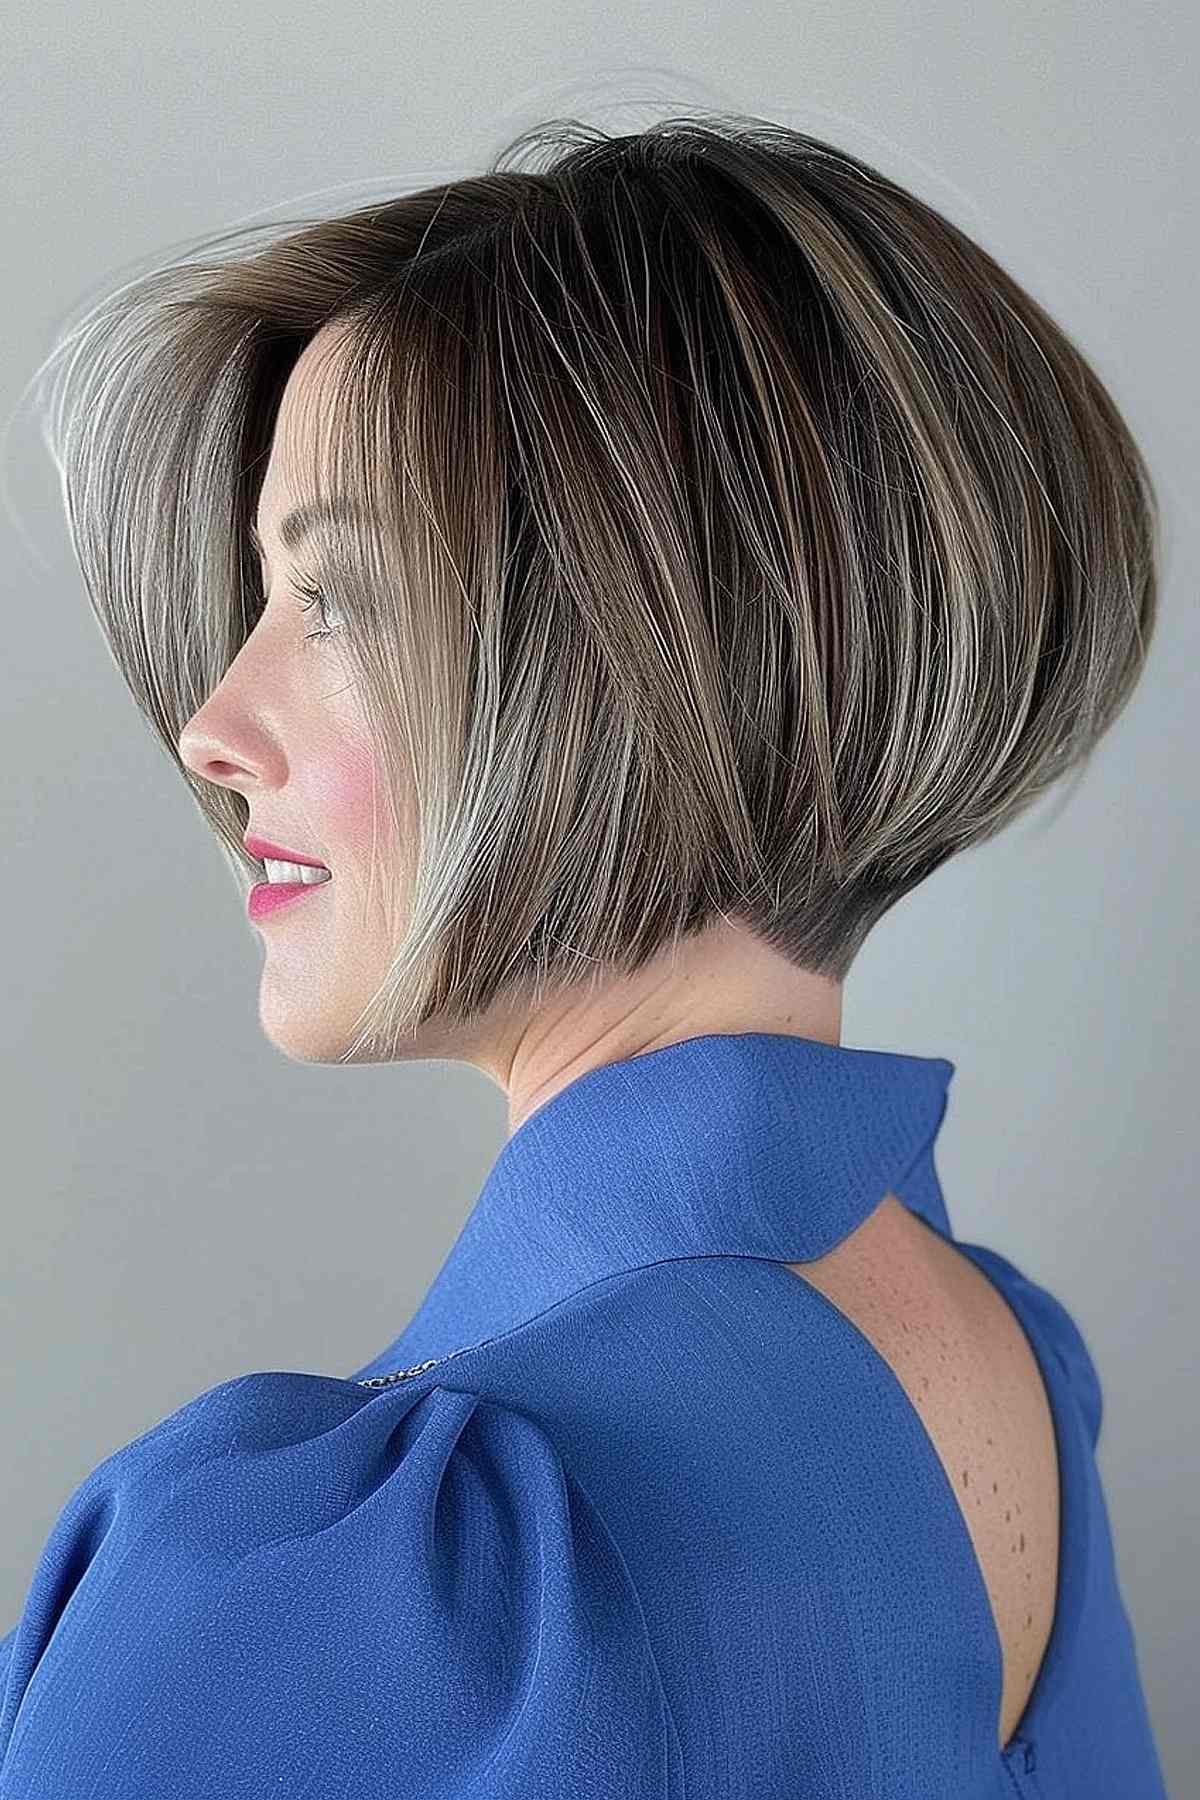 A chin-length bob with a stacked undercut creates a bold, edgy look with plenty of volume.